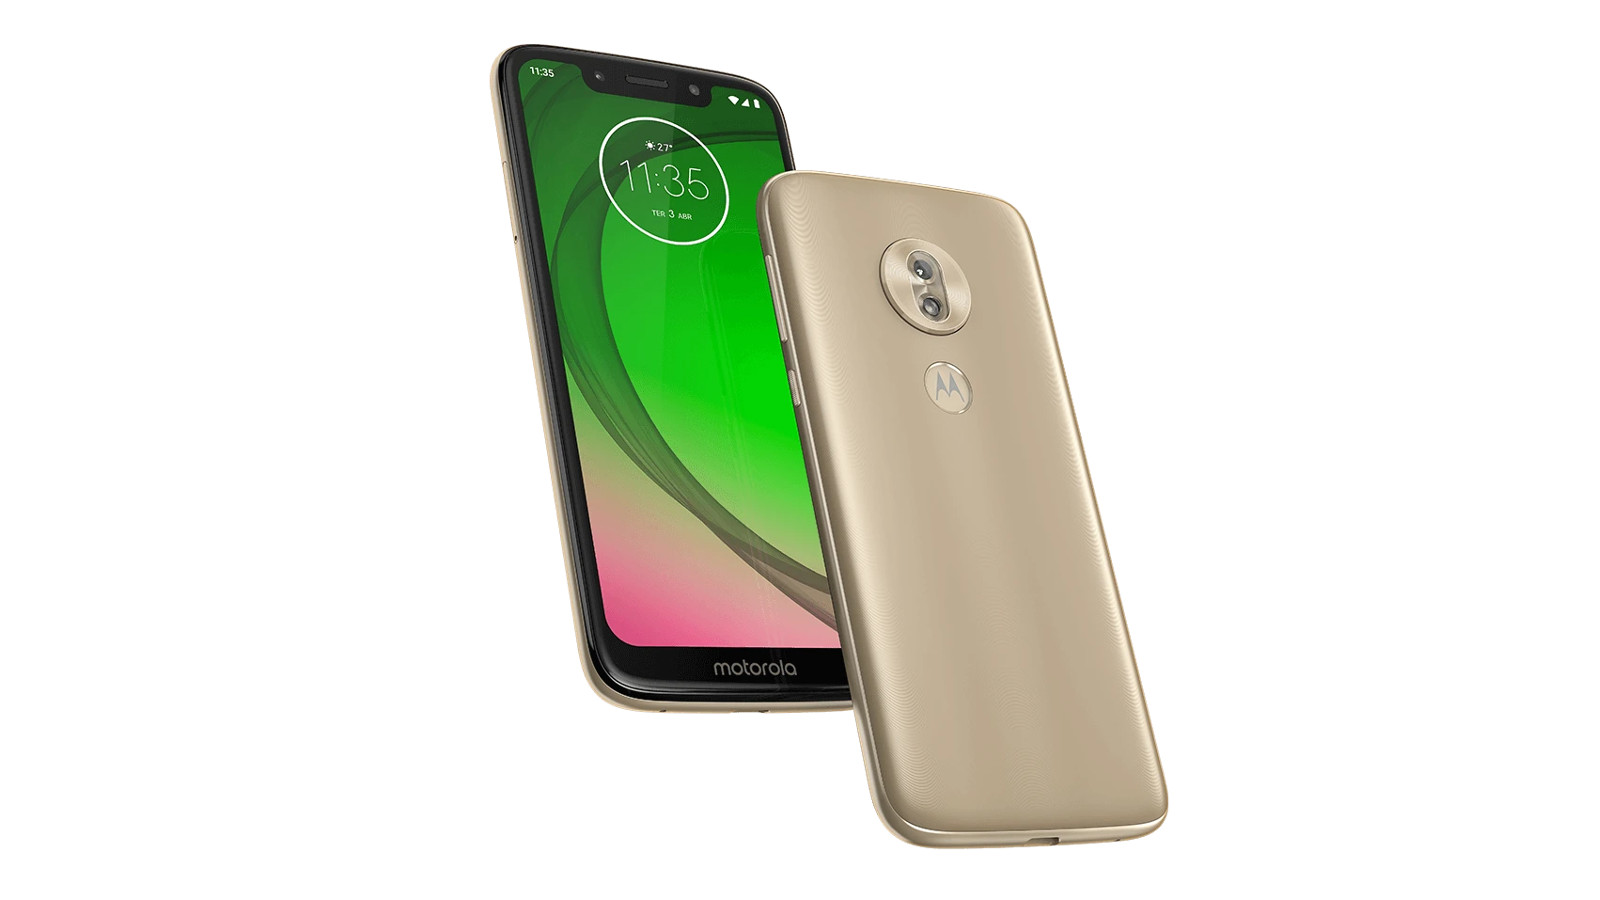 A render of what is said to be the Moto G7 Play with price starting at $$.